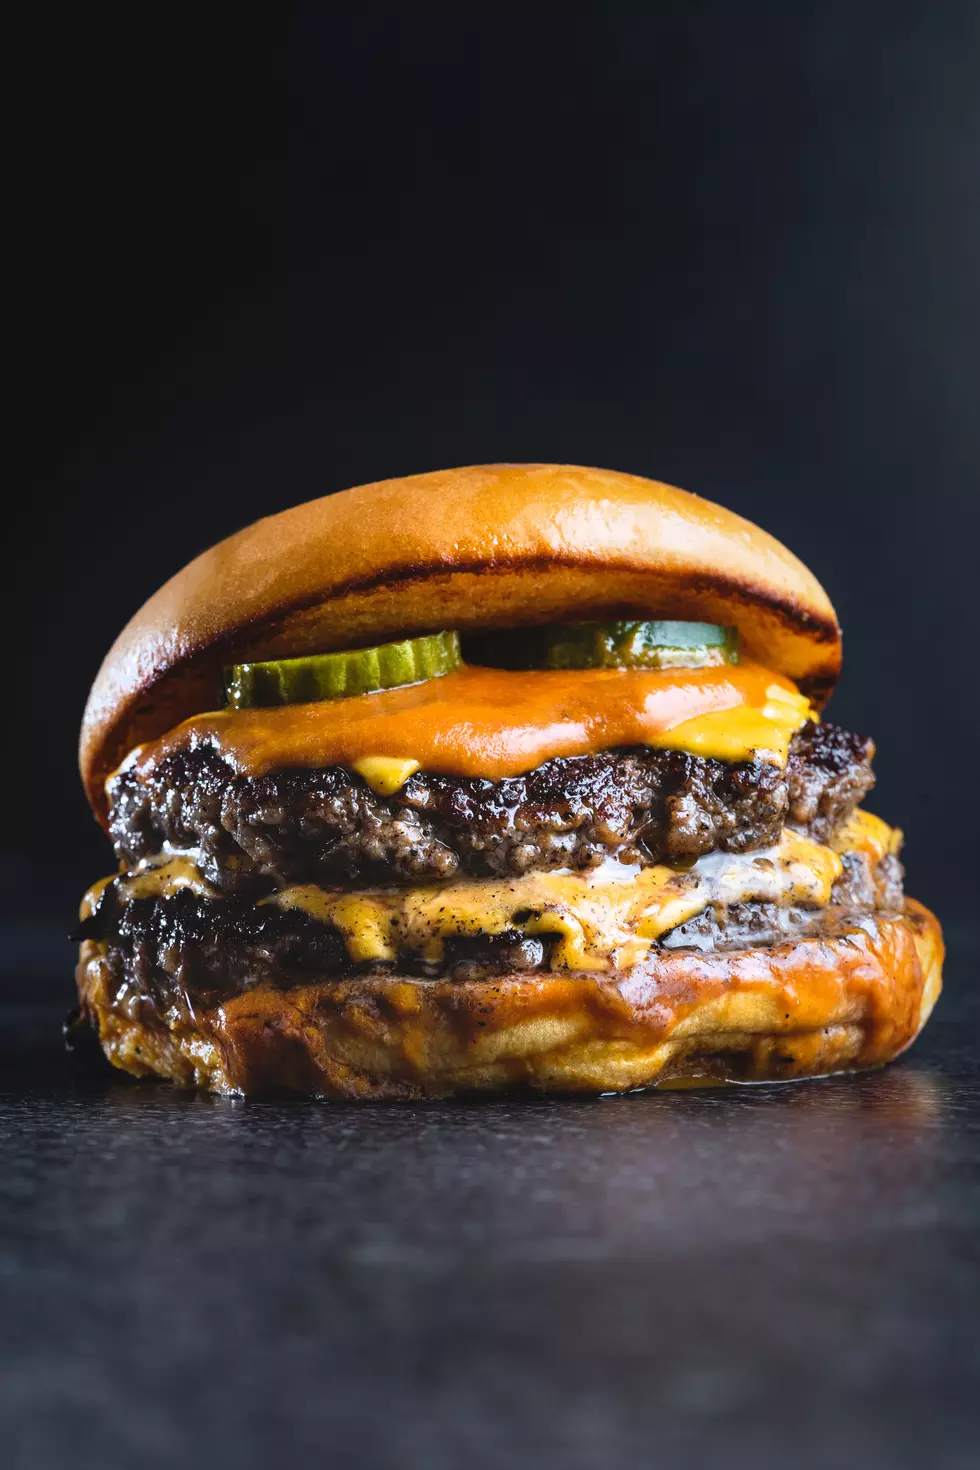 TripAdvisor’s Best Burgers In Montana. Do You See Your Favorite?